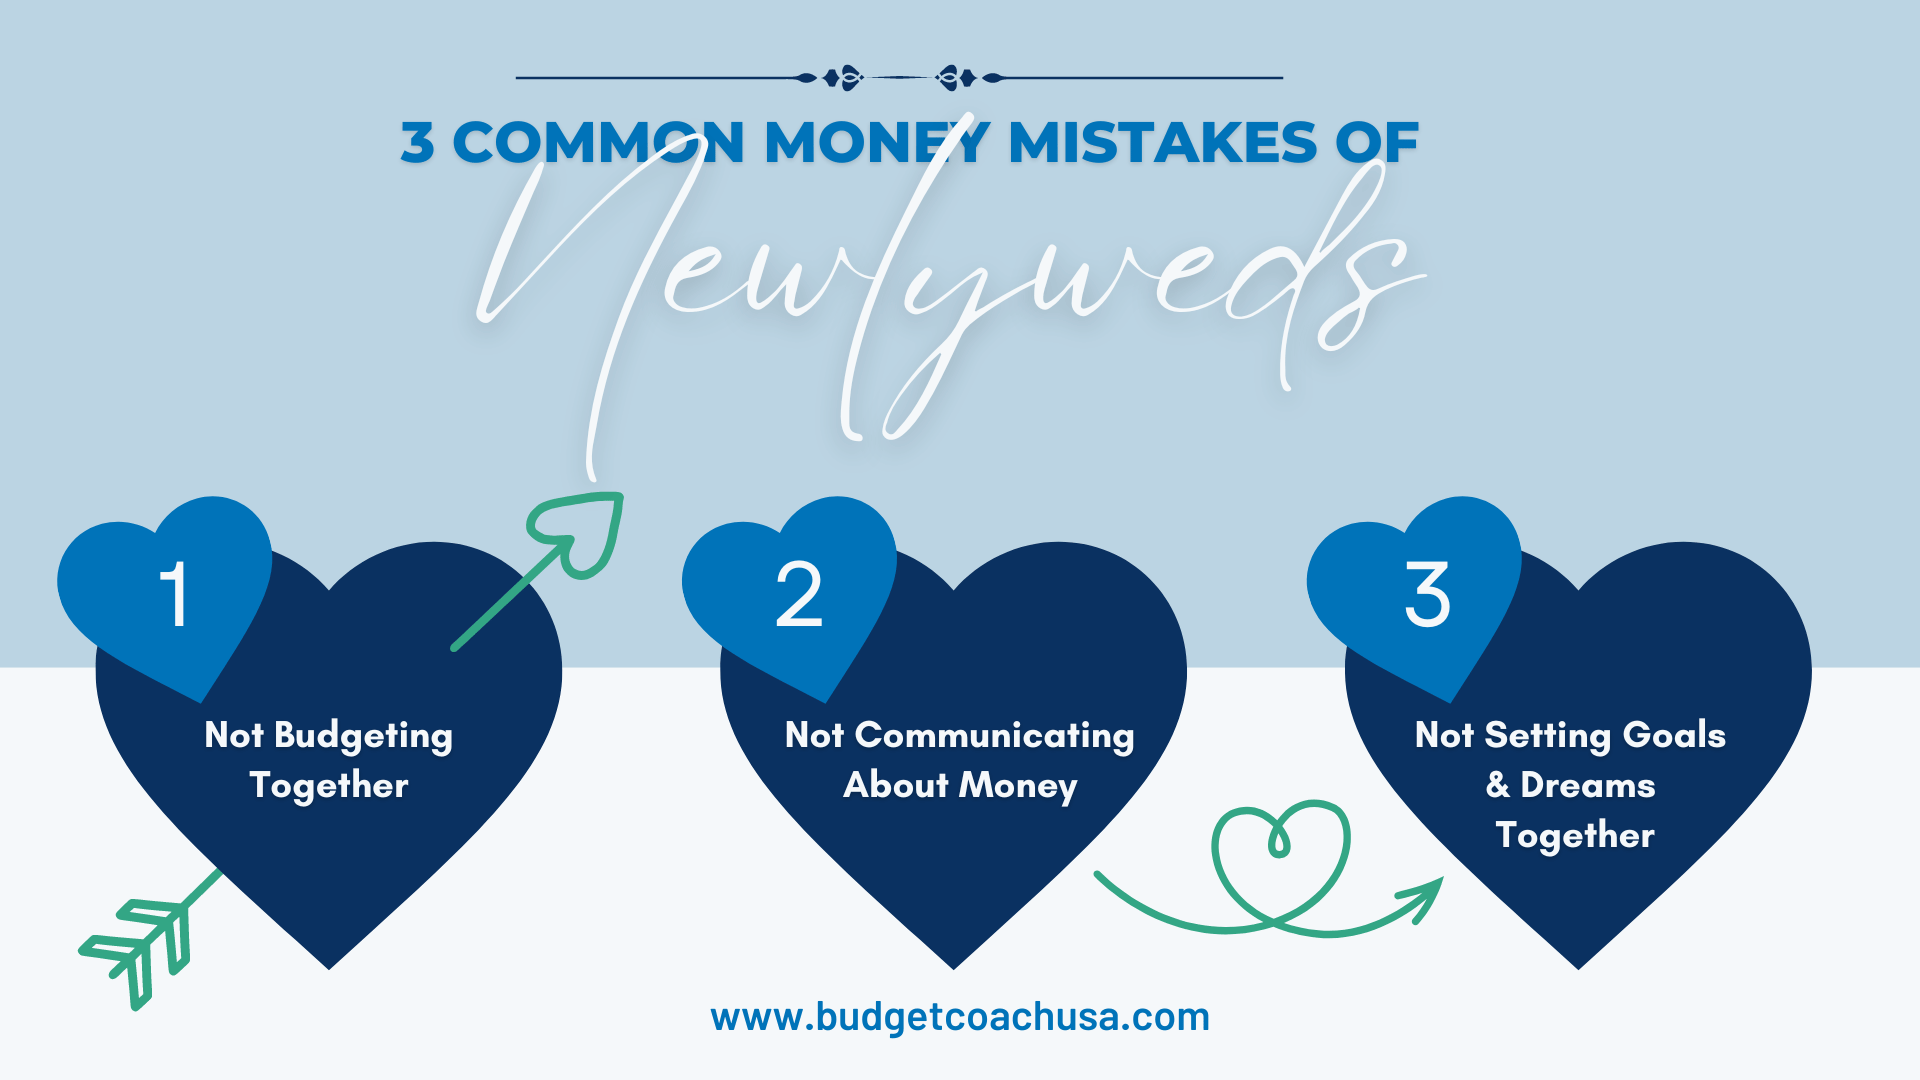 3 Common Money Mistakes for Newlyweds